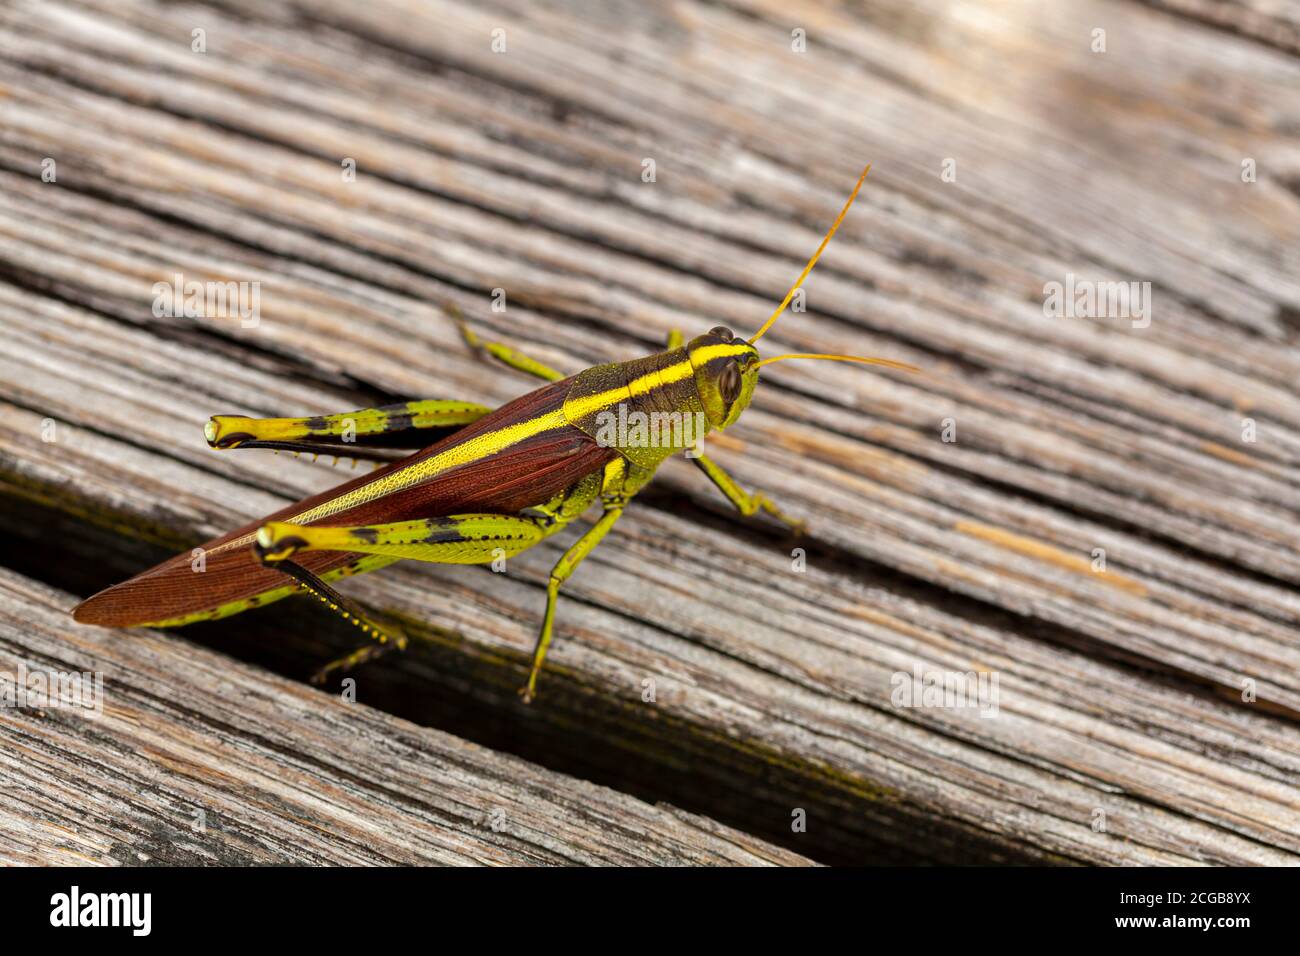 Close up image of an obscure bird grasshopper (Schistocerca obscura) on a wooden bench. This is a green insect with yellow back stripe, striped eyes, Stock Photo